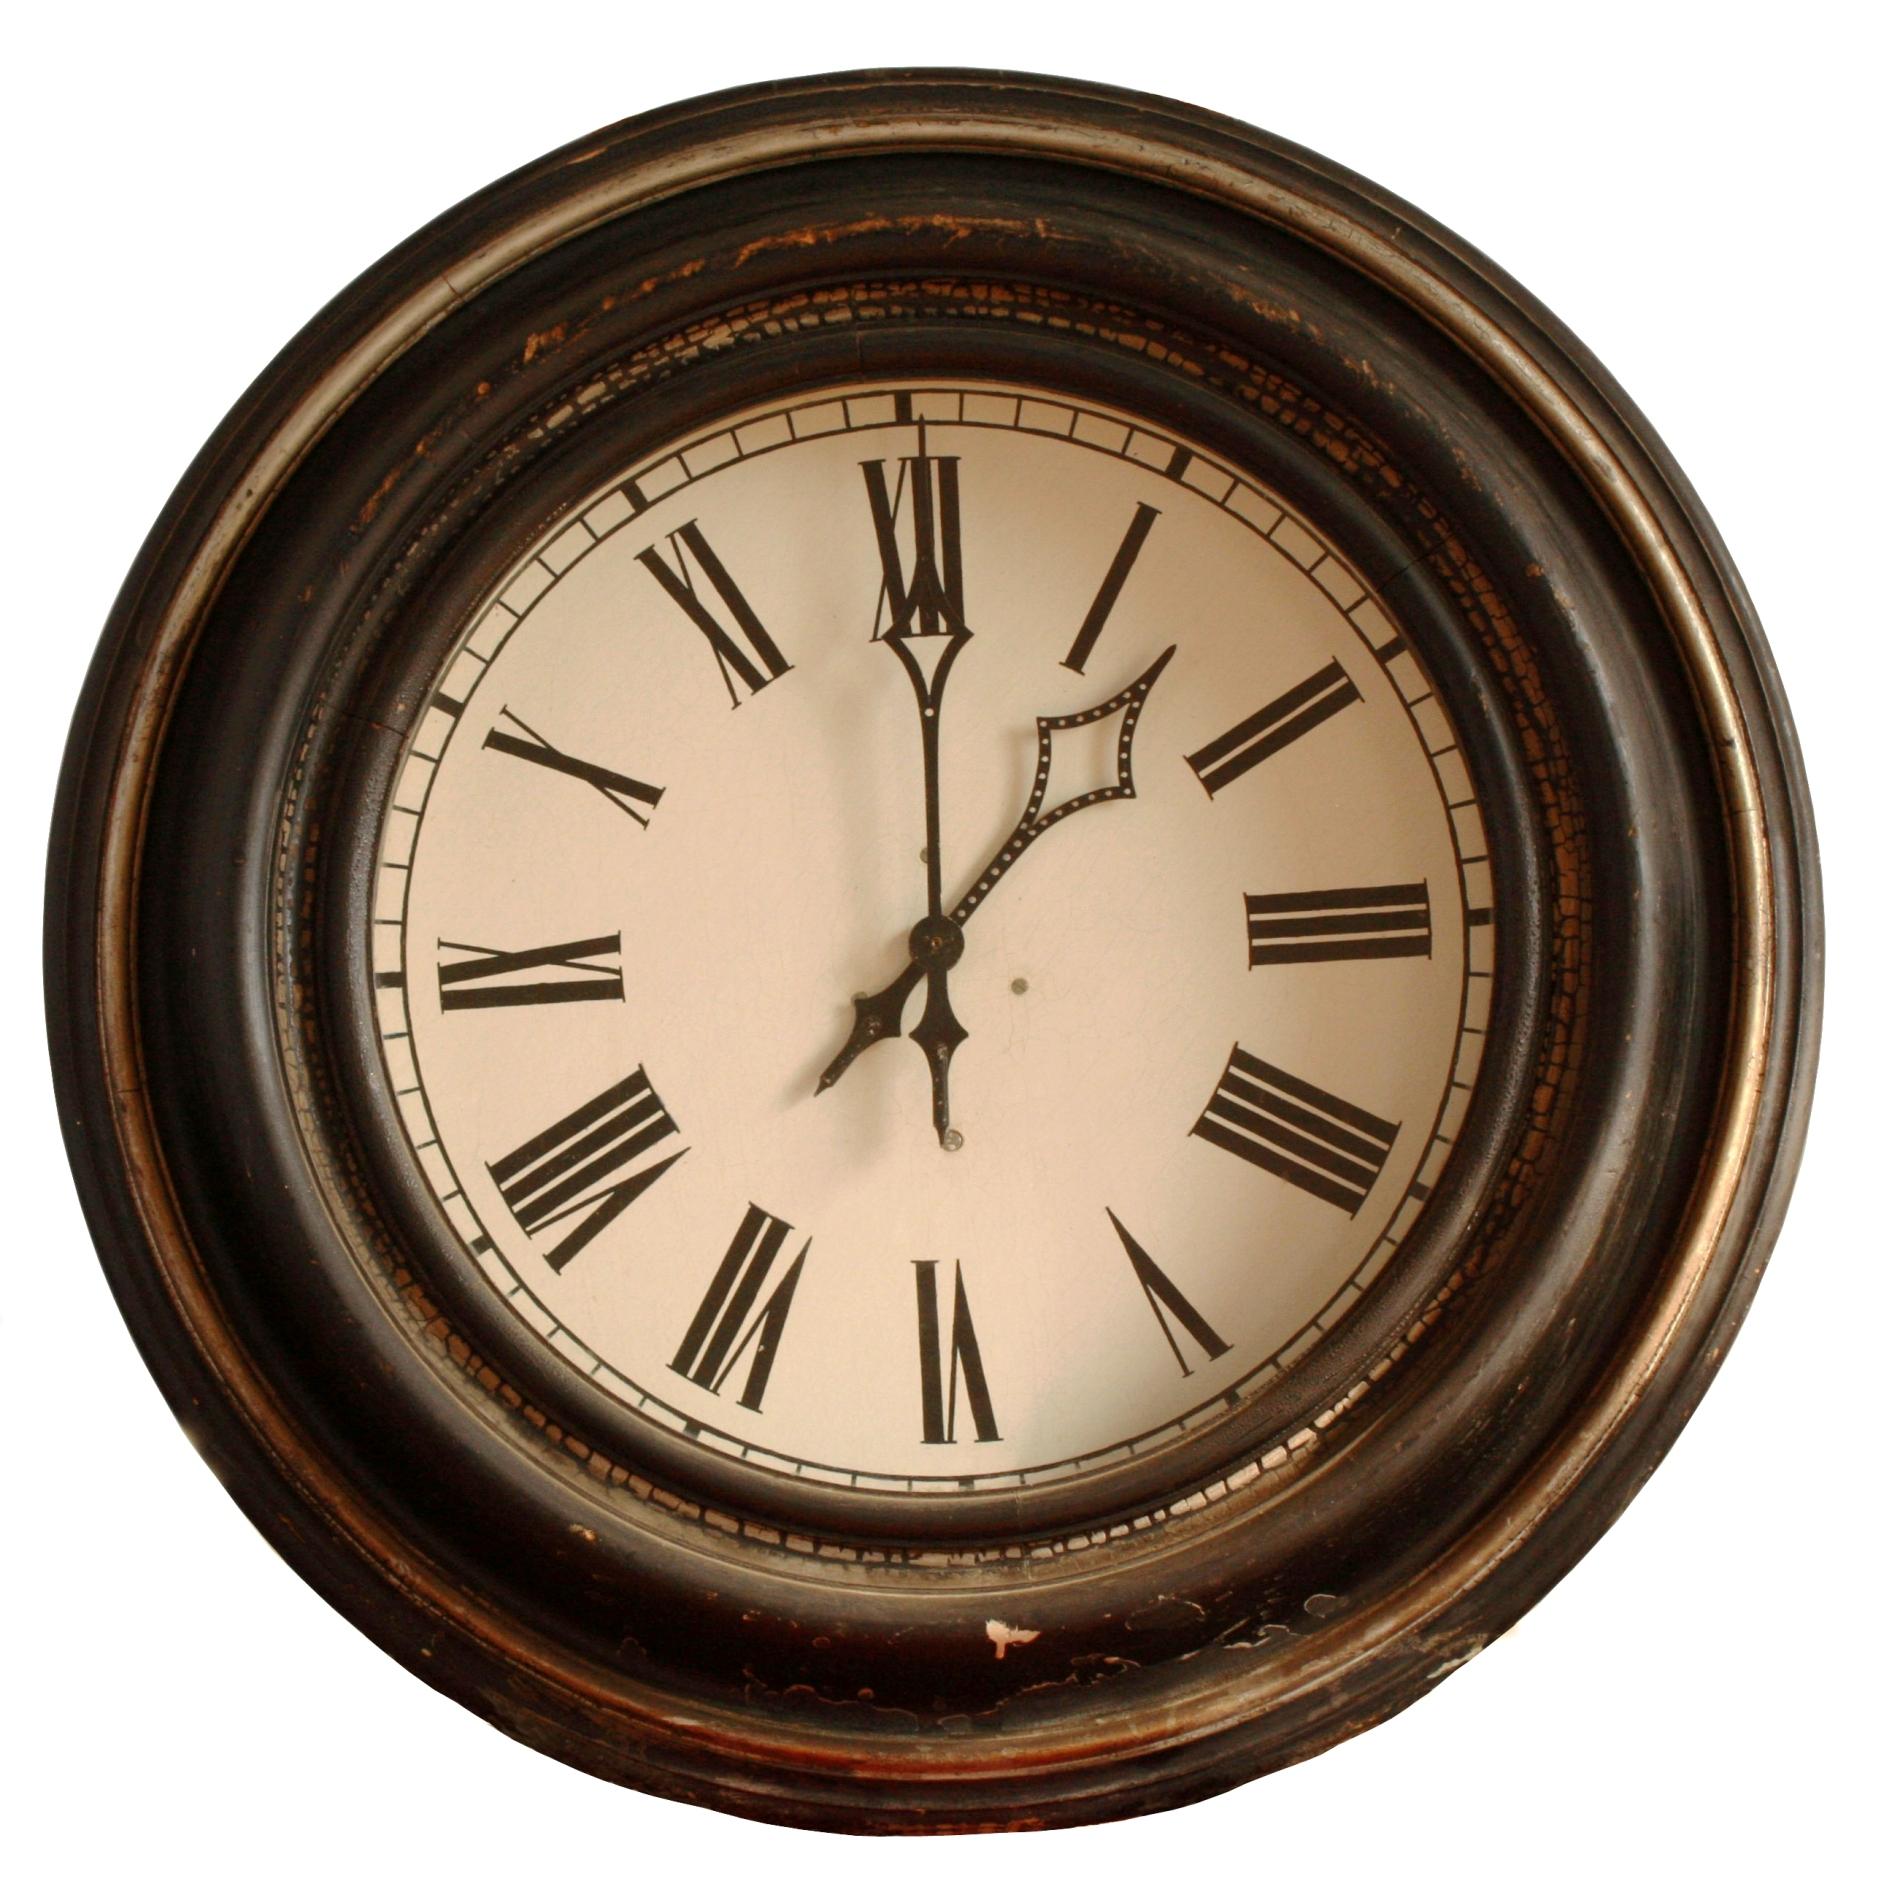 Very Big Antique Wood Cased Iron Dial Railway Station Clock, Germany, 1890s For Sale